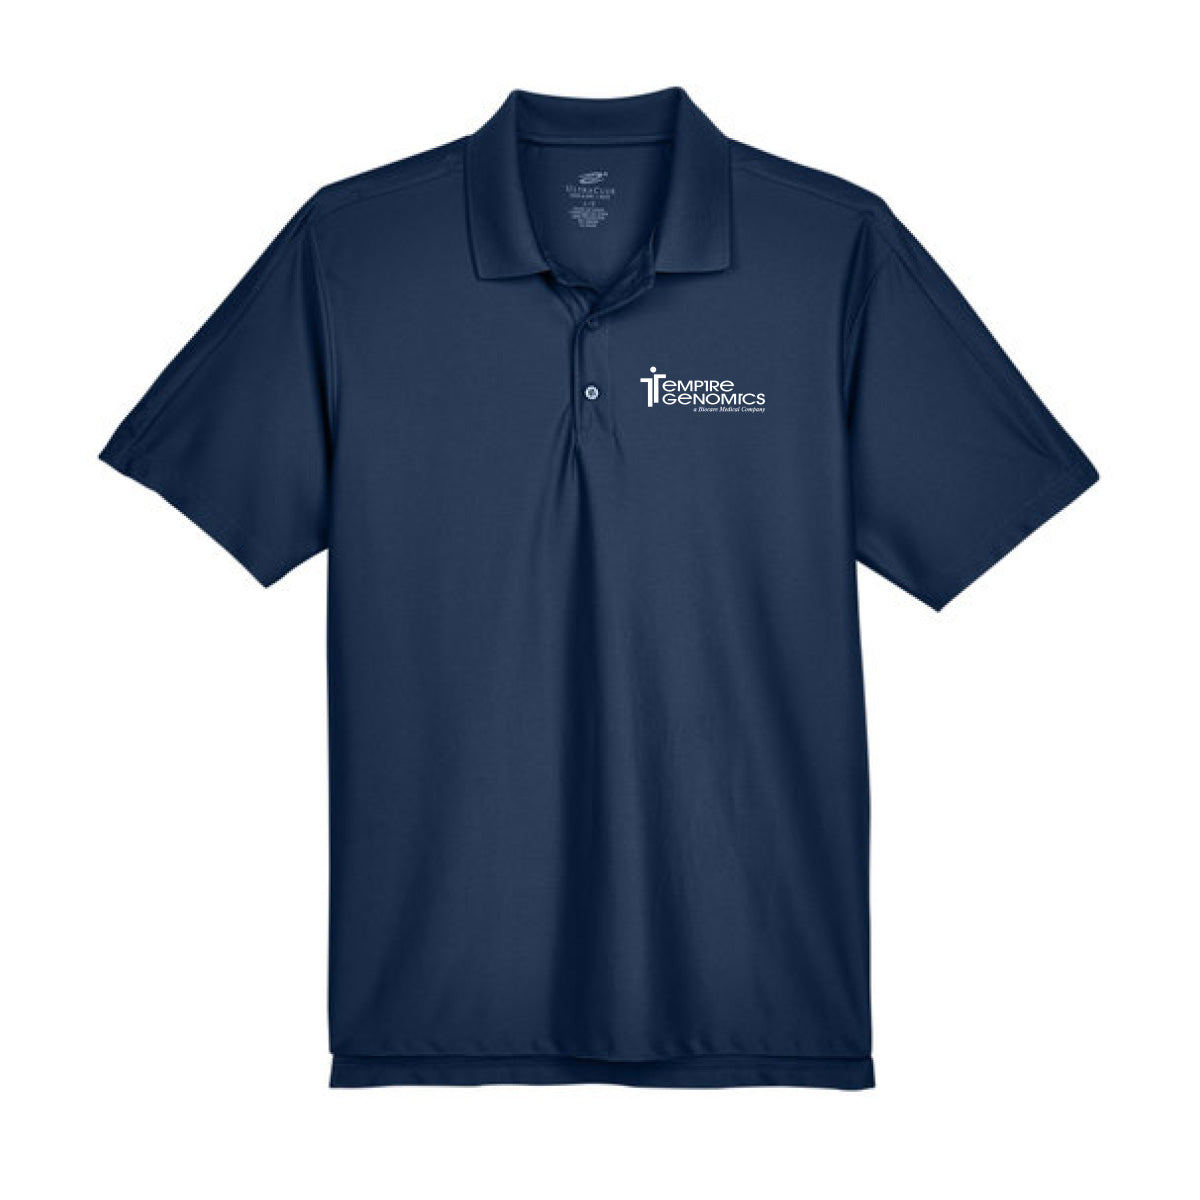 UltraClub Men's Cool & Dry Elite Performance Polo - Biocare Medical Company Store